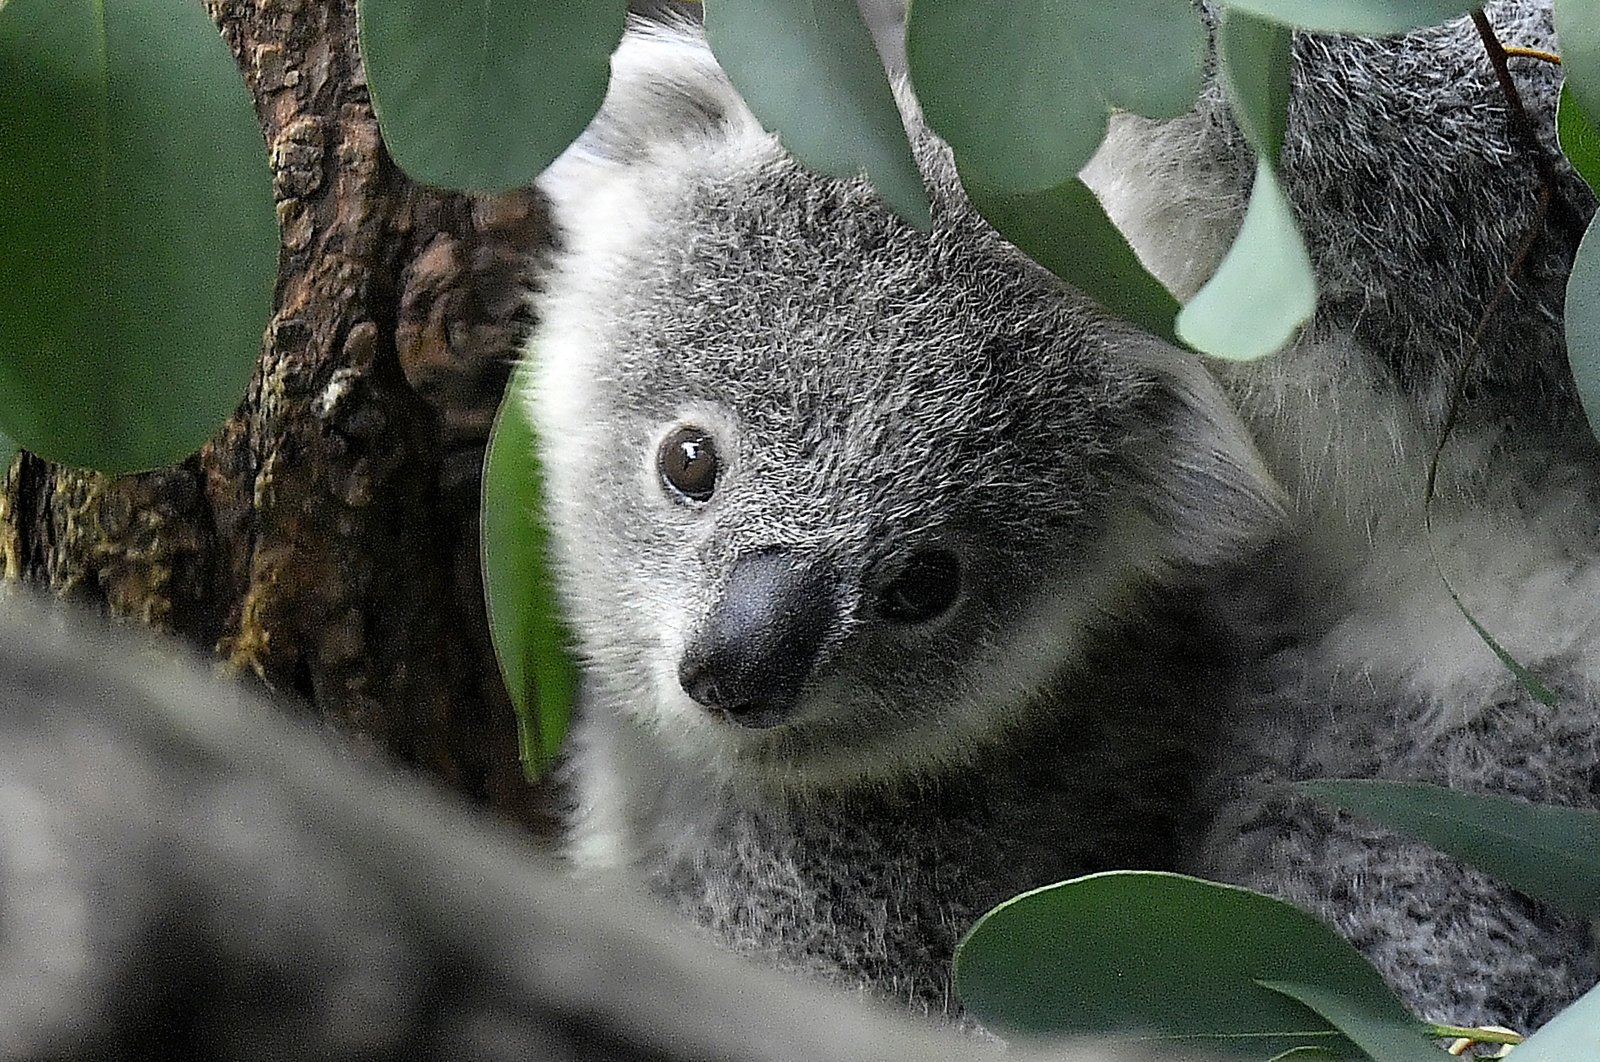 A young koala looks through eucalyptus leaves in a zoo in Duisburg, Germany, Sept. 28, 2018. (AP Photo)